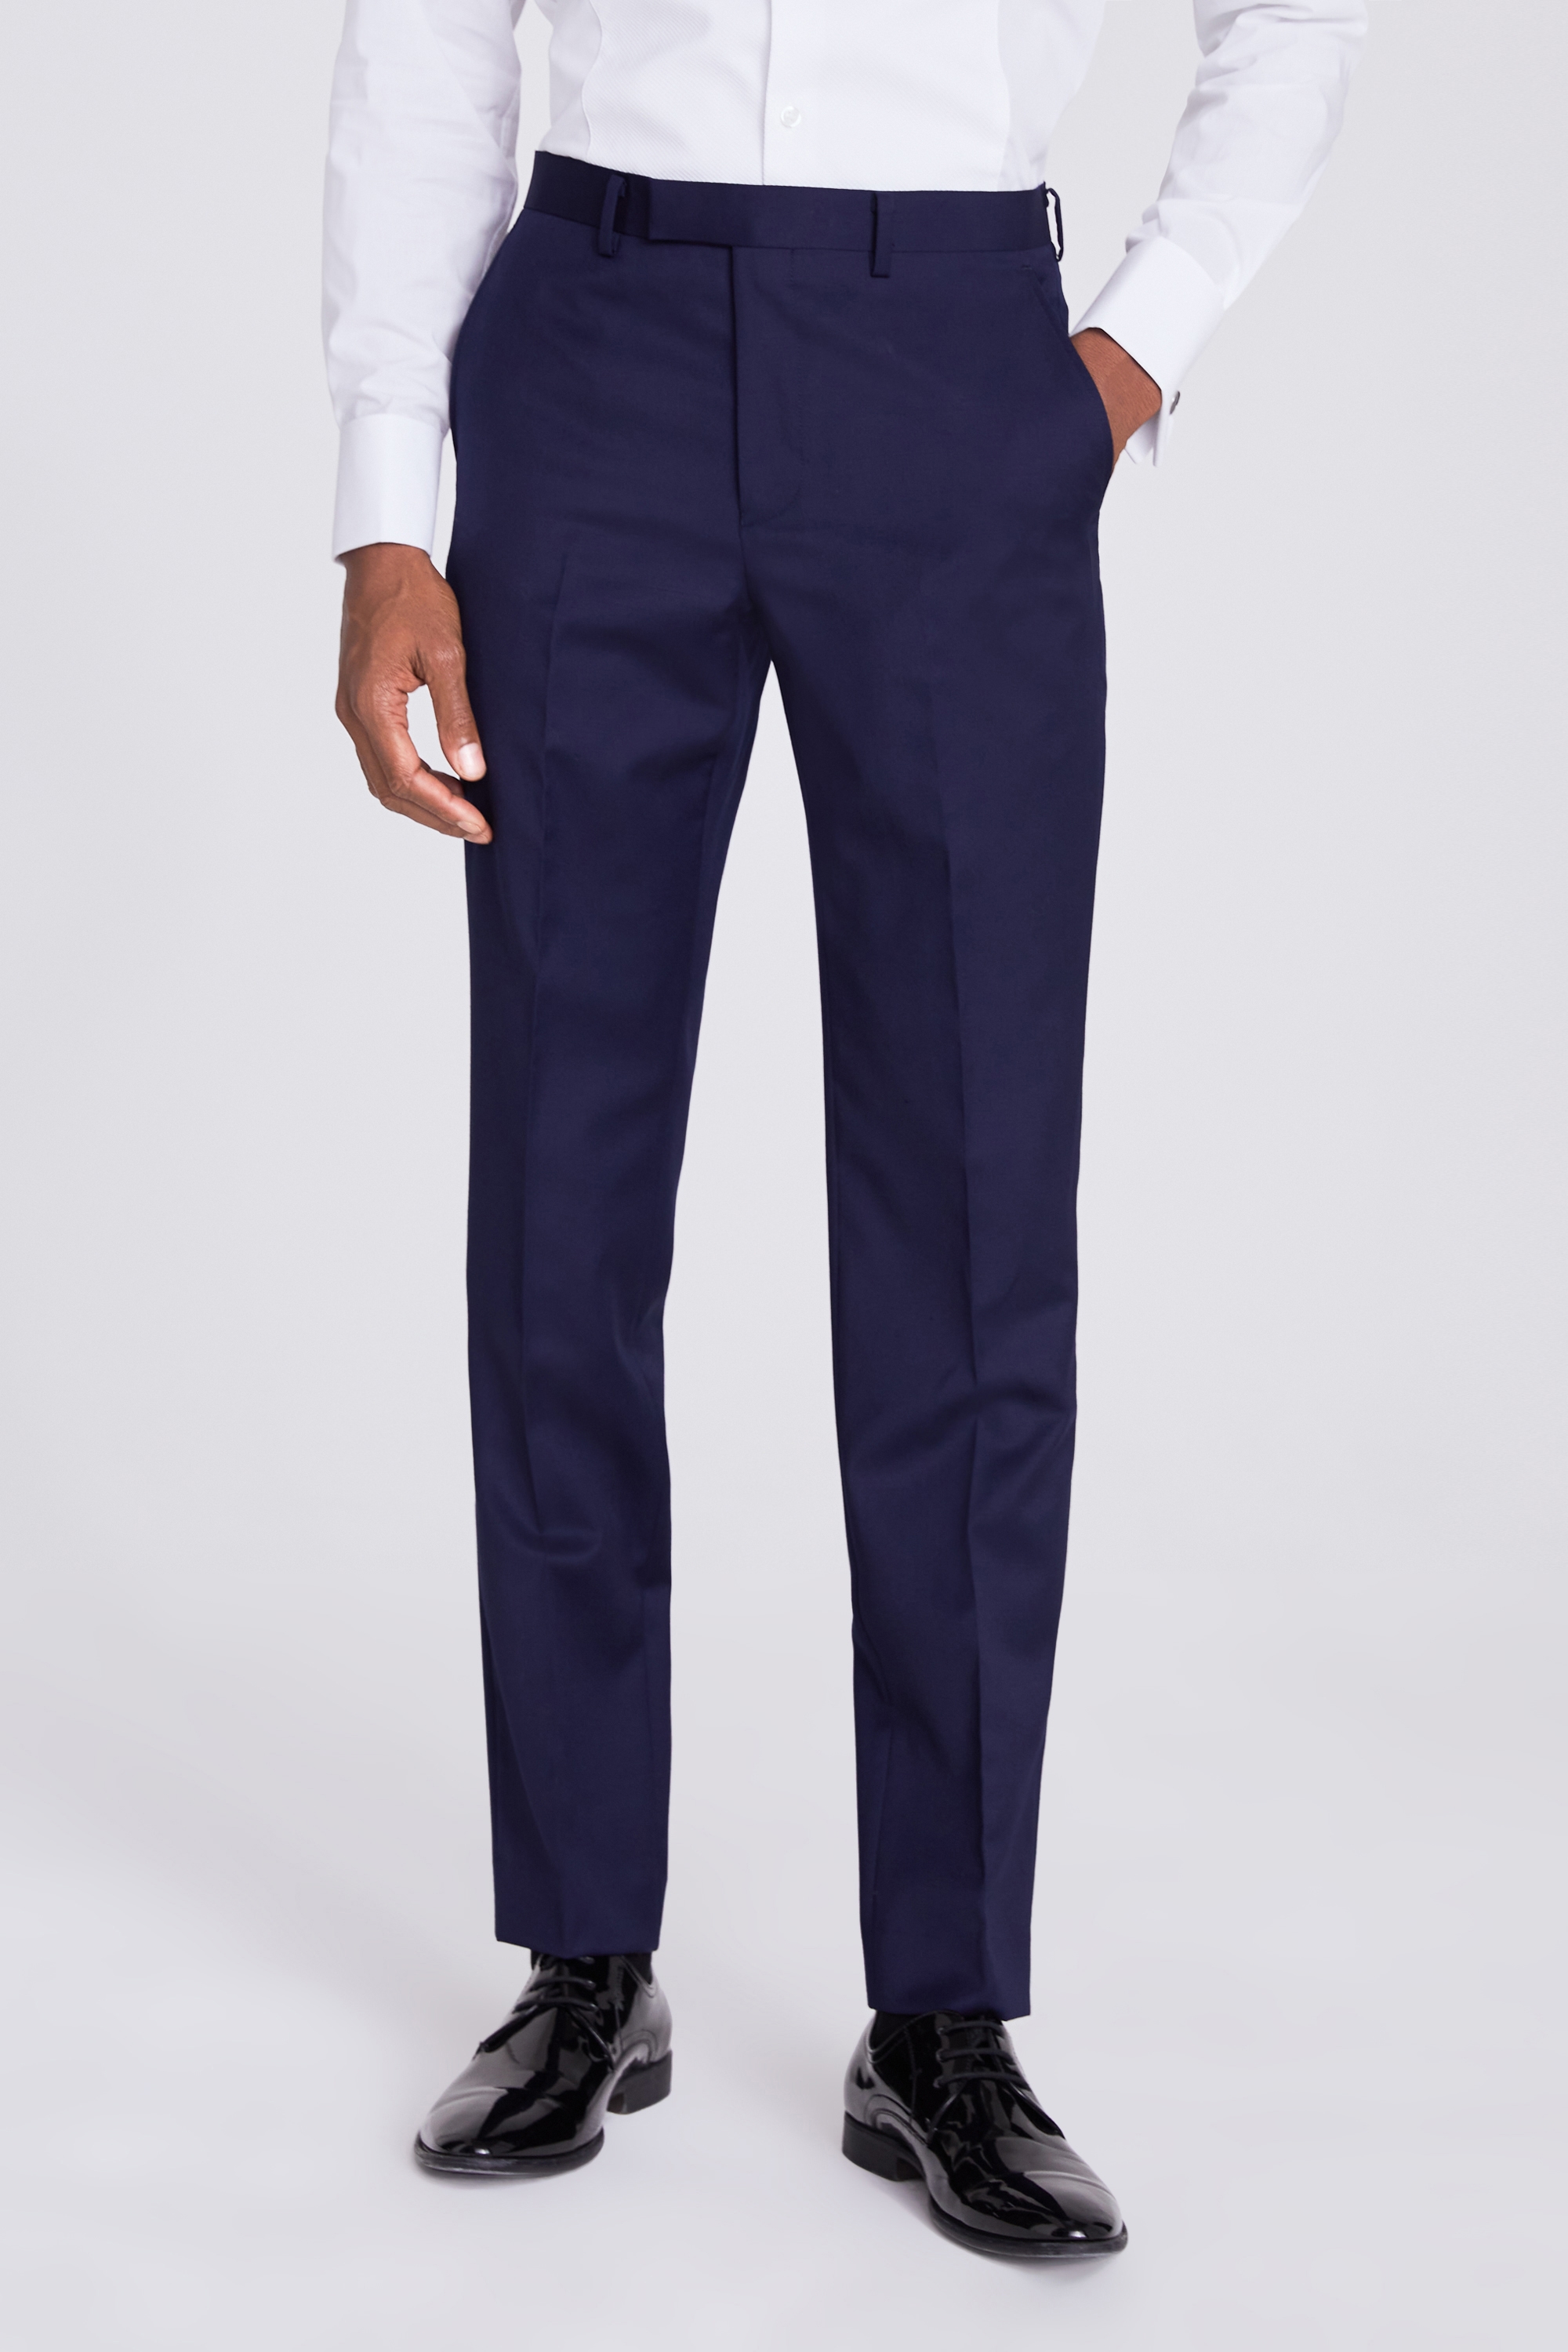 Tailored Fit Navy Twill Tuxedo Trousers | Buy Online at Moss